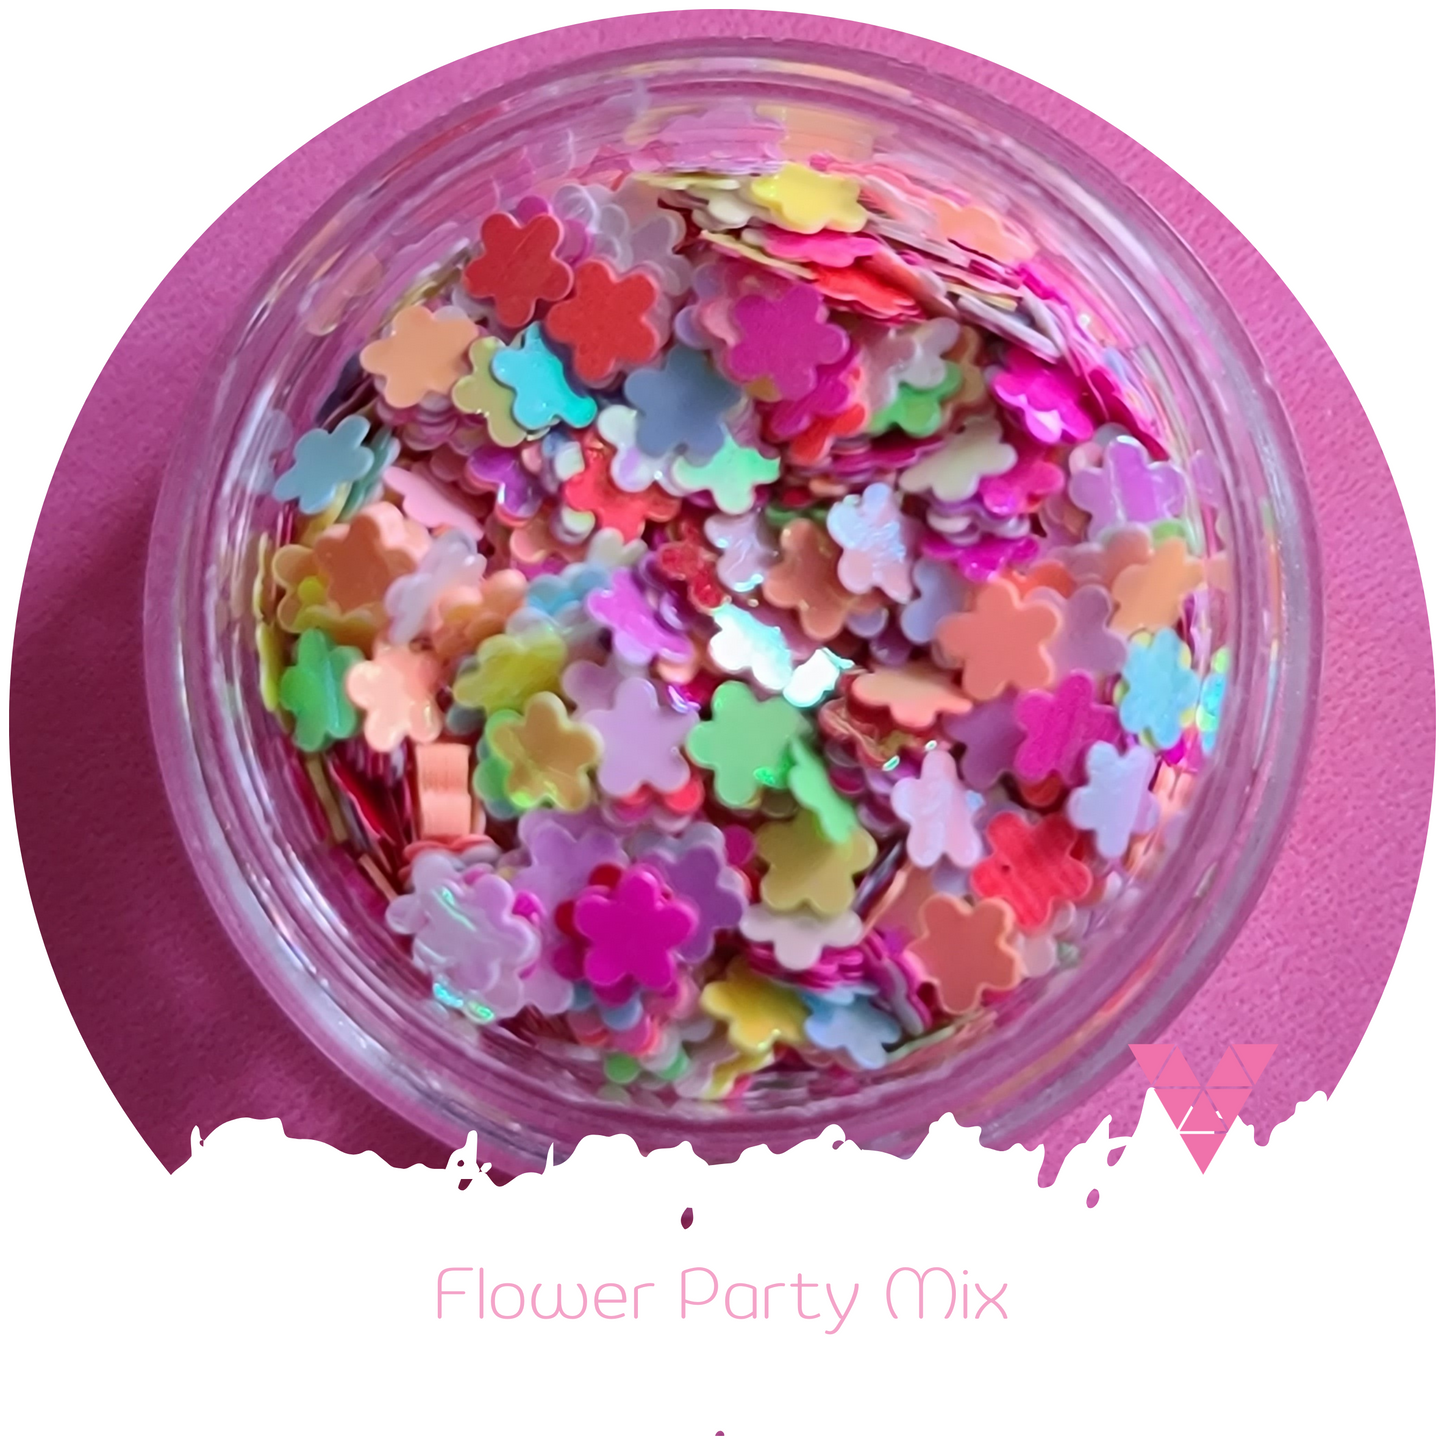 Flower Party Mix